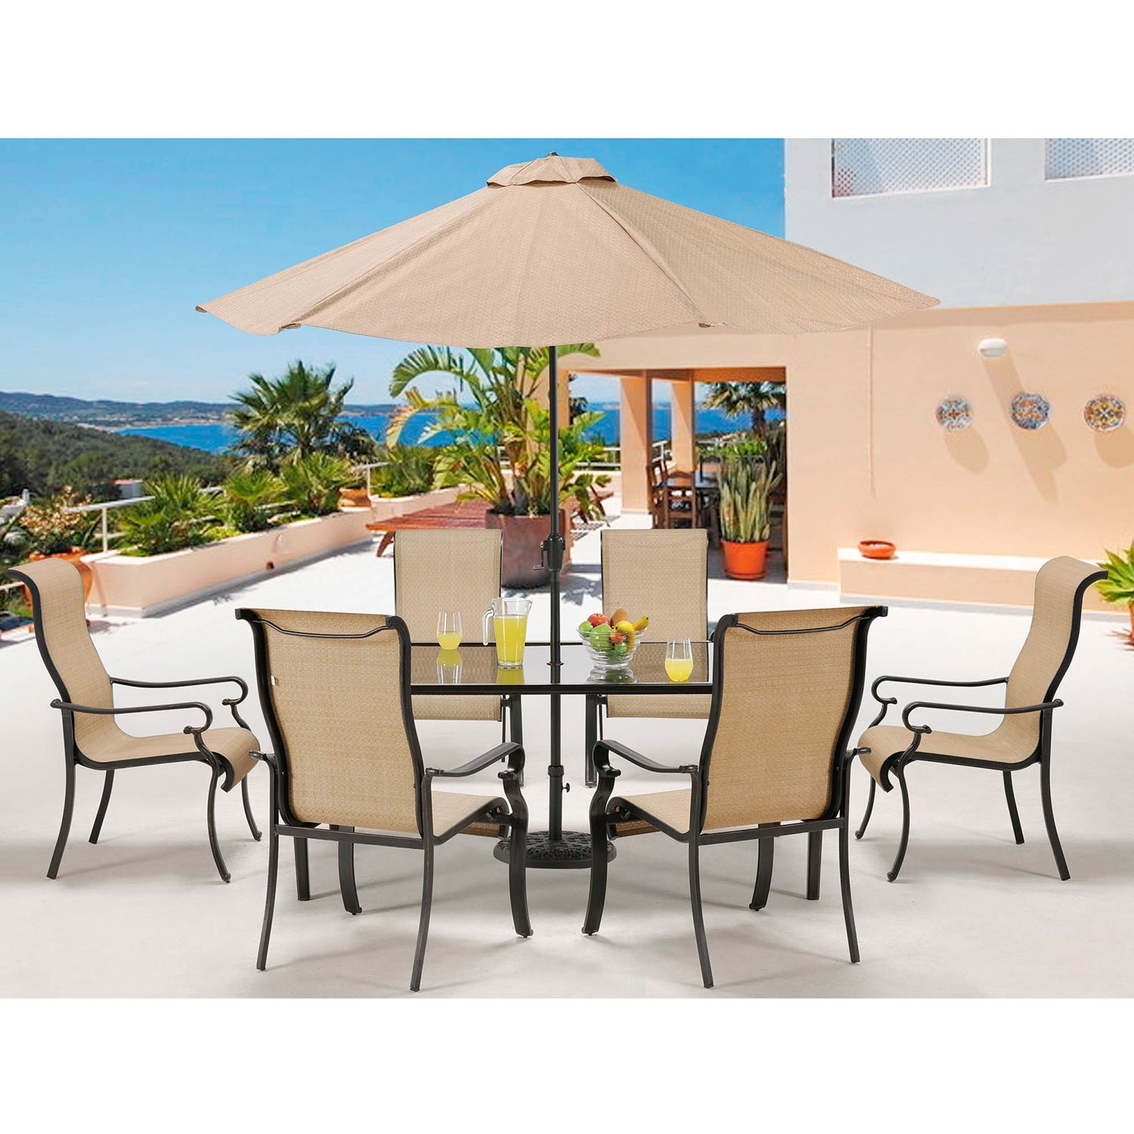 Hanover Brigantine 7 pc. Outdoor Dining Set with Glass Tabletop and 9 ft. Umbrella - Image 2 of 4